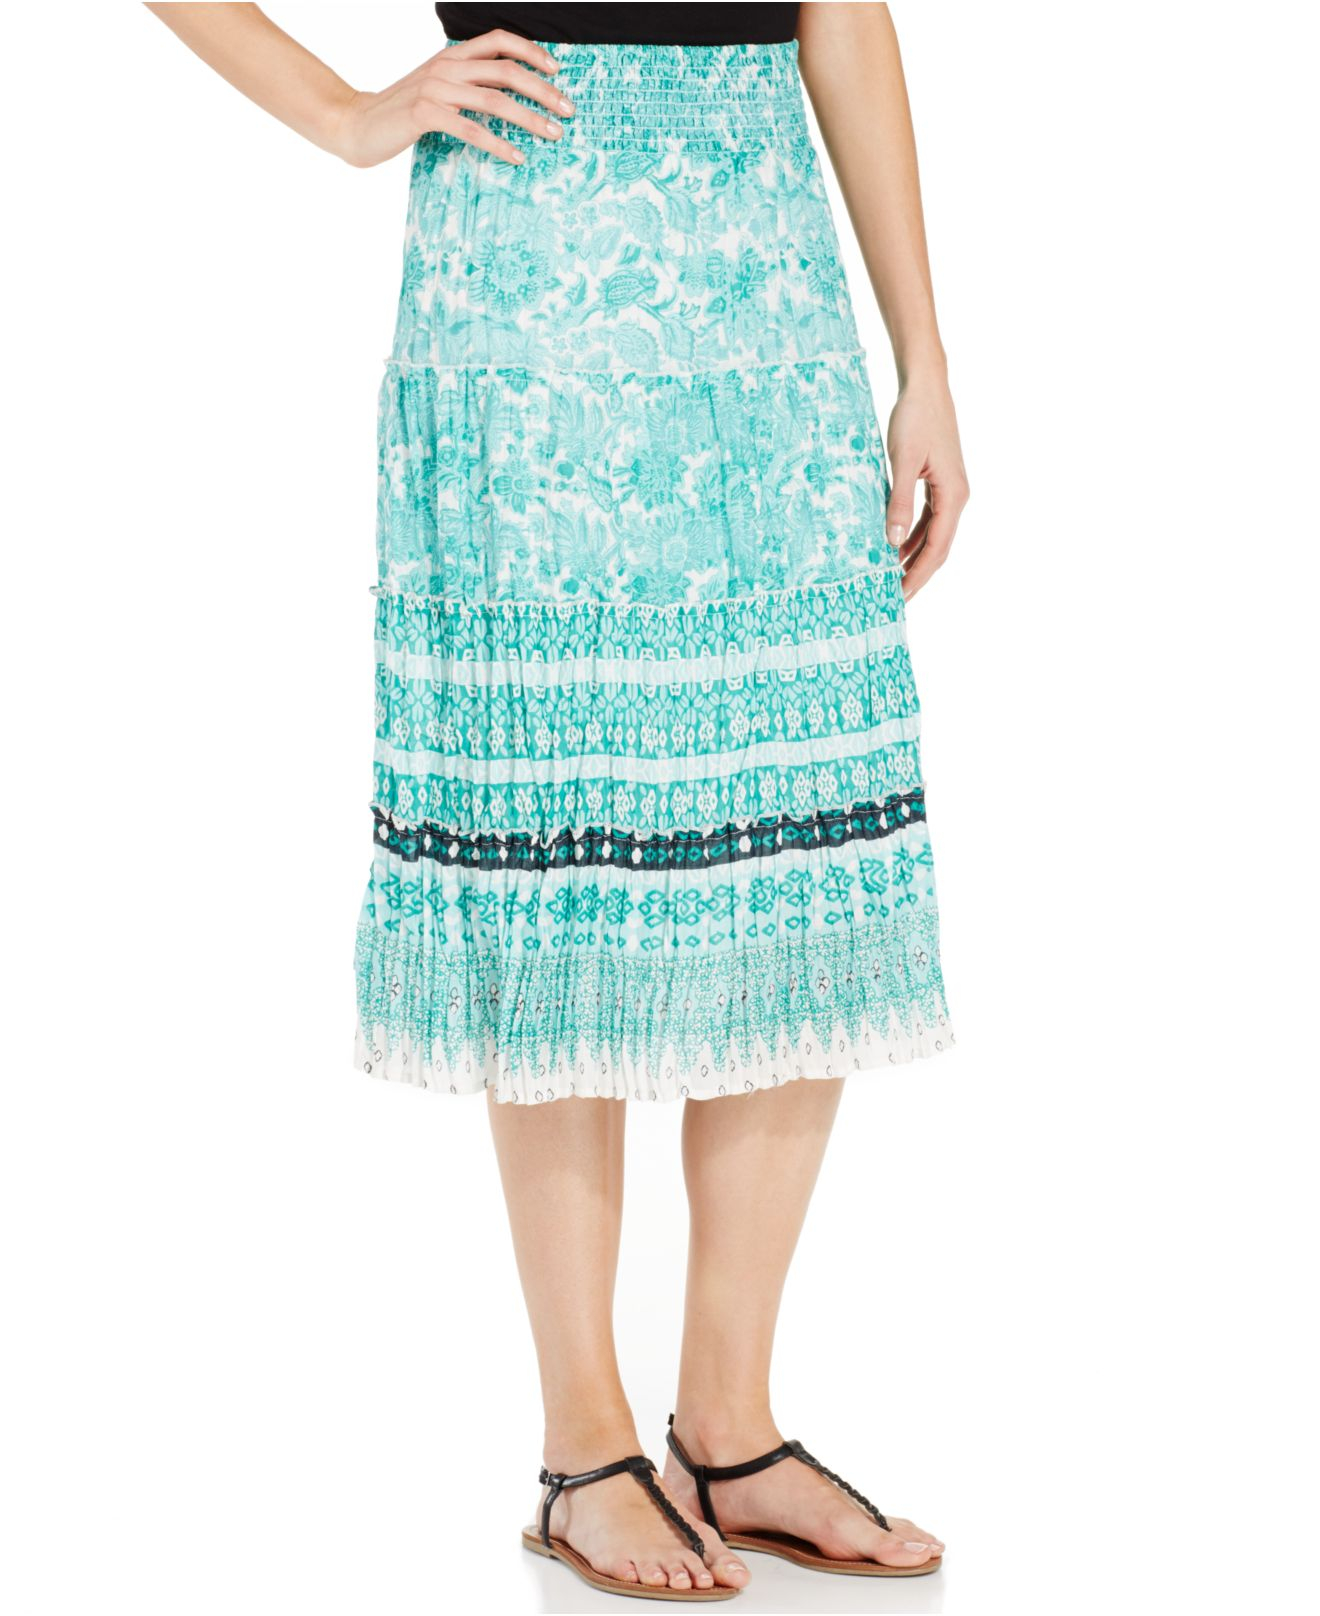 Lyst - Style & Co. Style&Co. Printed Tiered Midi Skirt in Blue